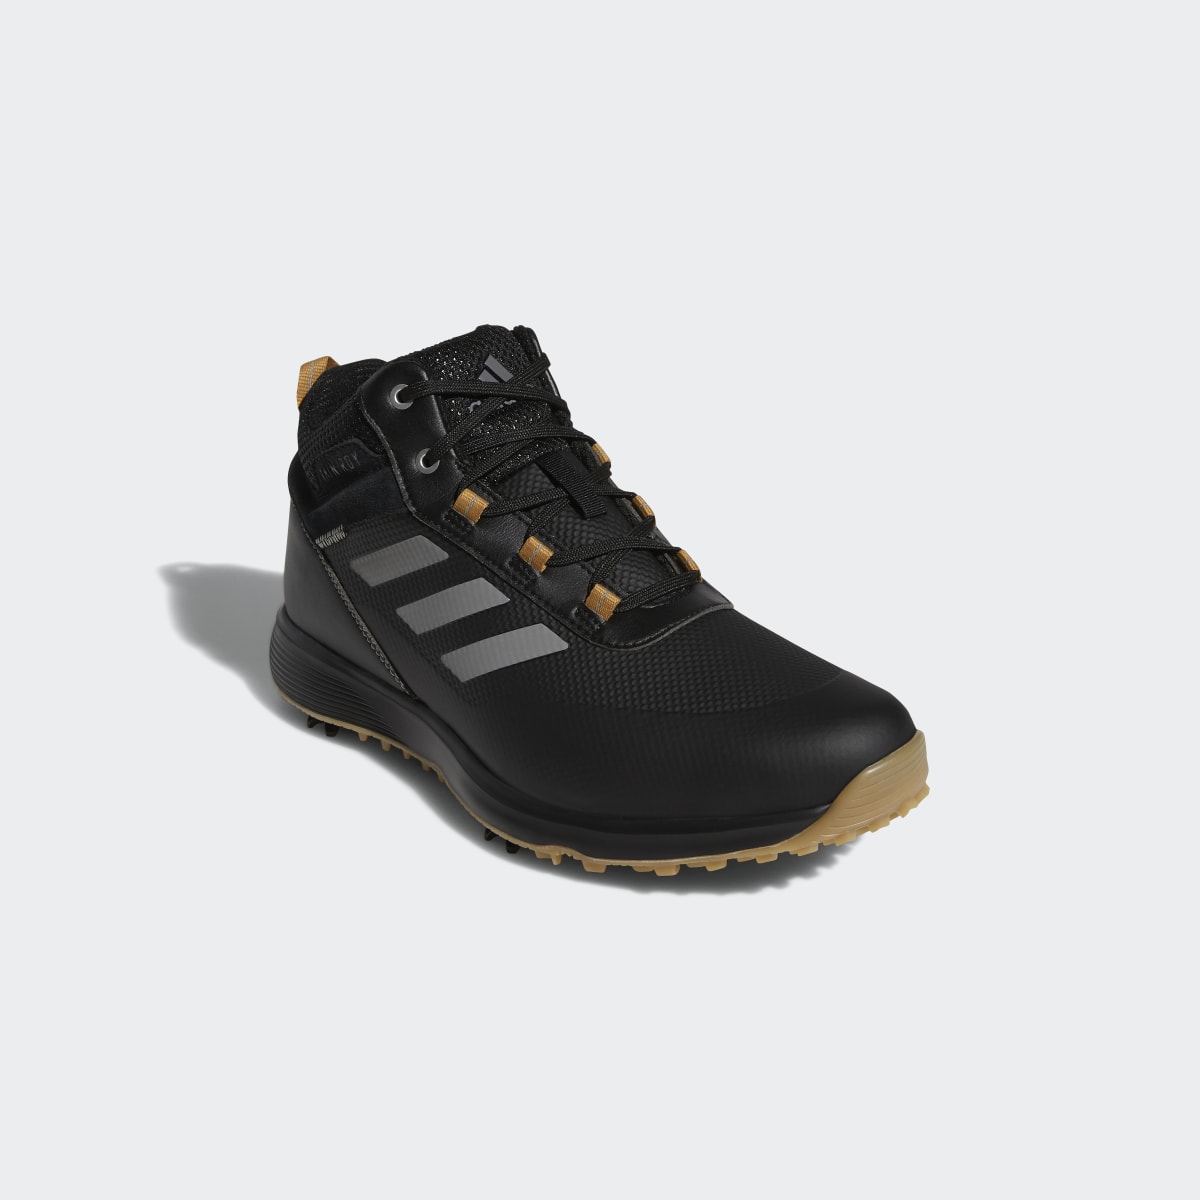 Adidas S2G Recycled Polyester Mid-Cut Golf Shoes. 7